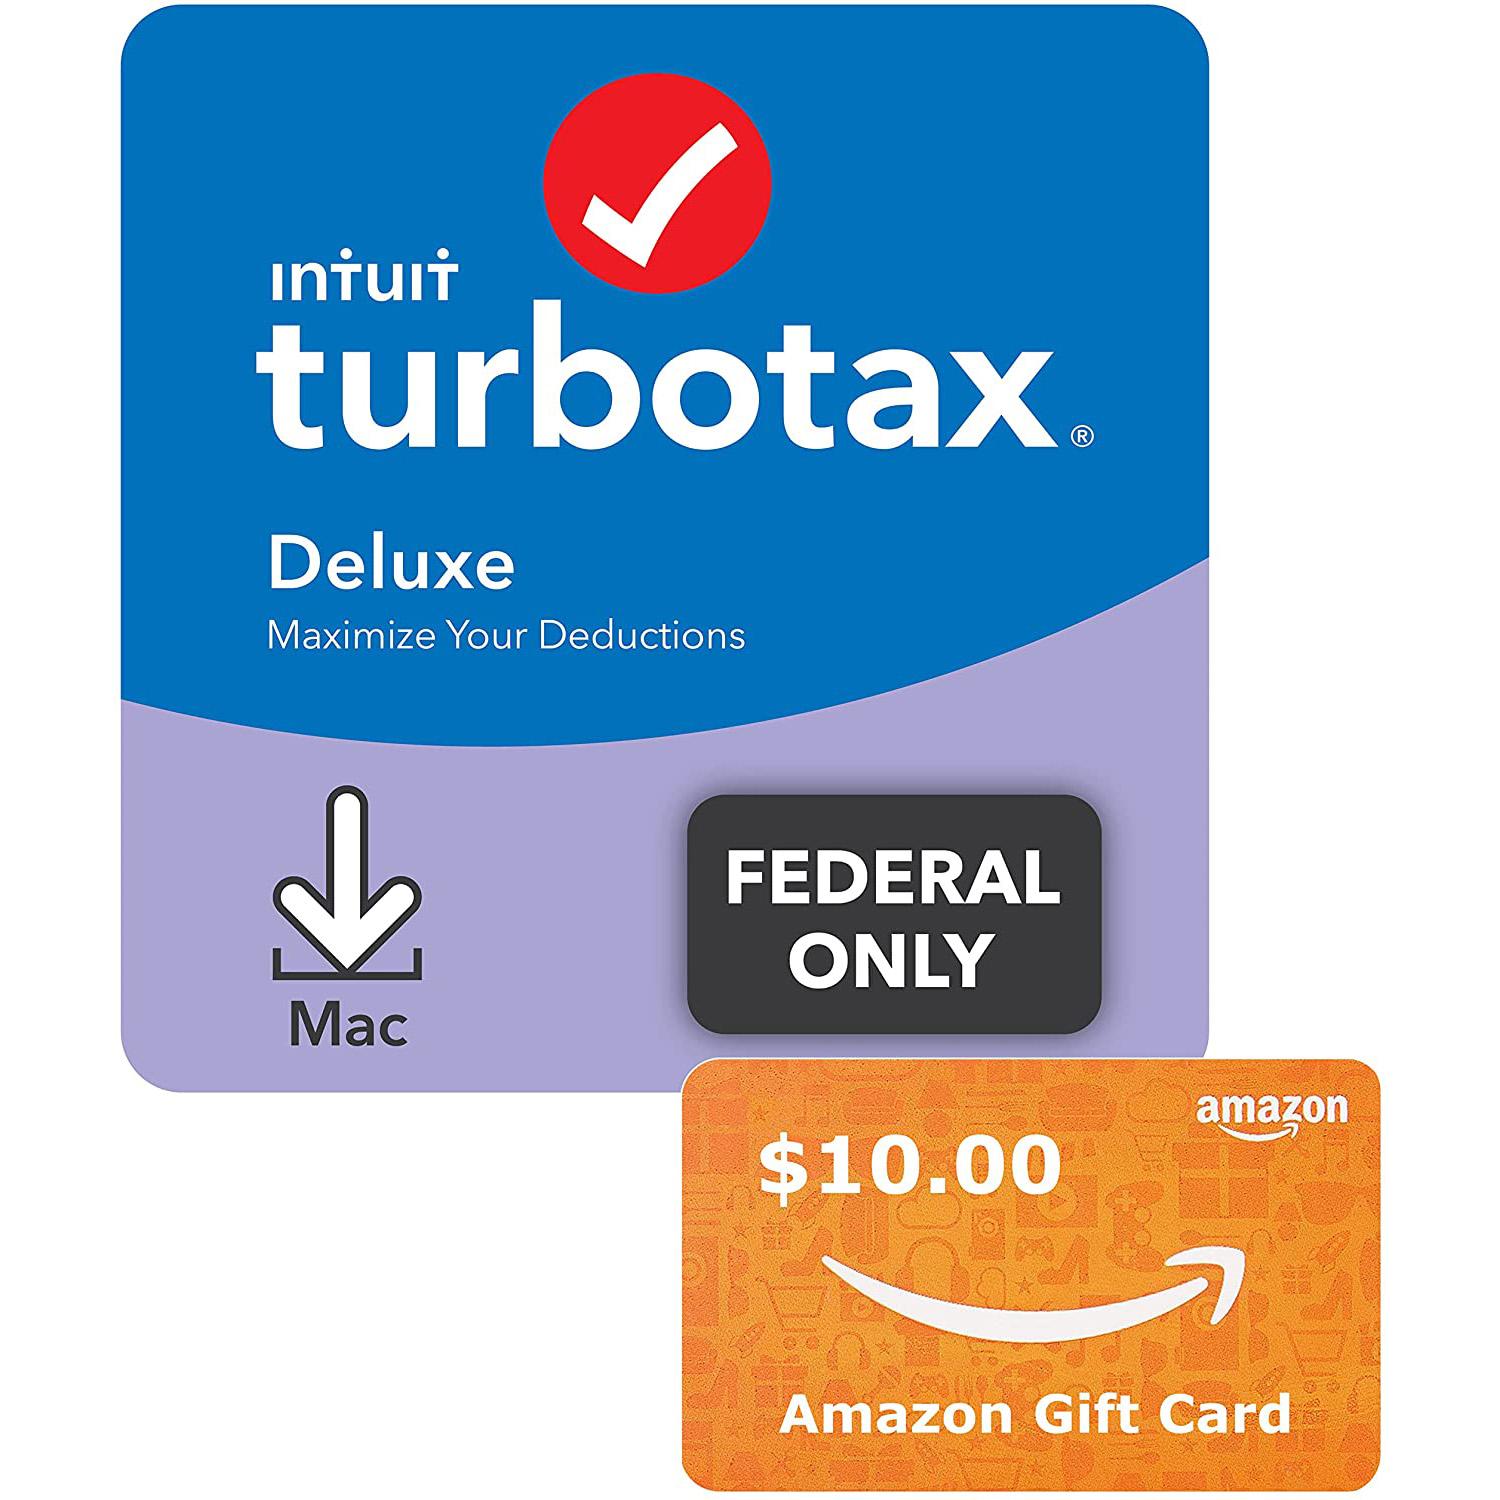 TurboTax Deluxe 2021 + $10 Amazon Gift Card for $39.99 Shipped